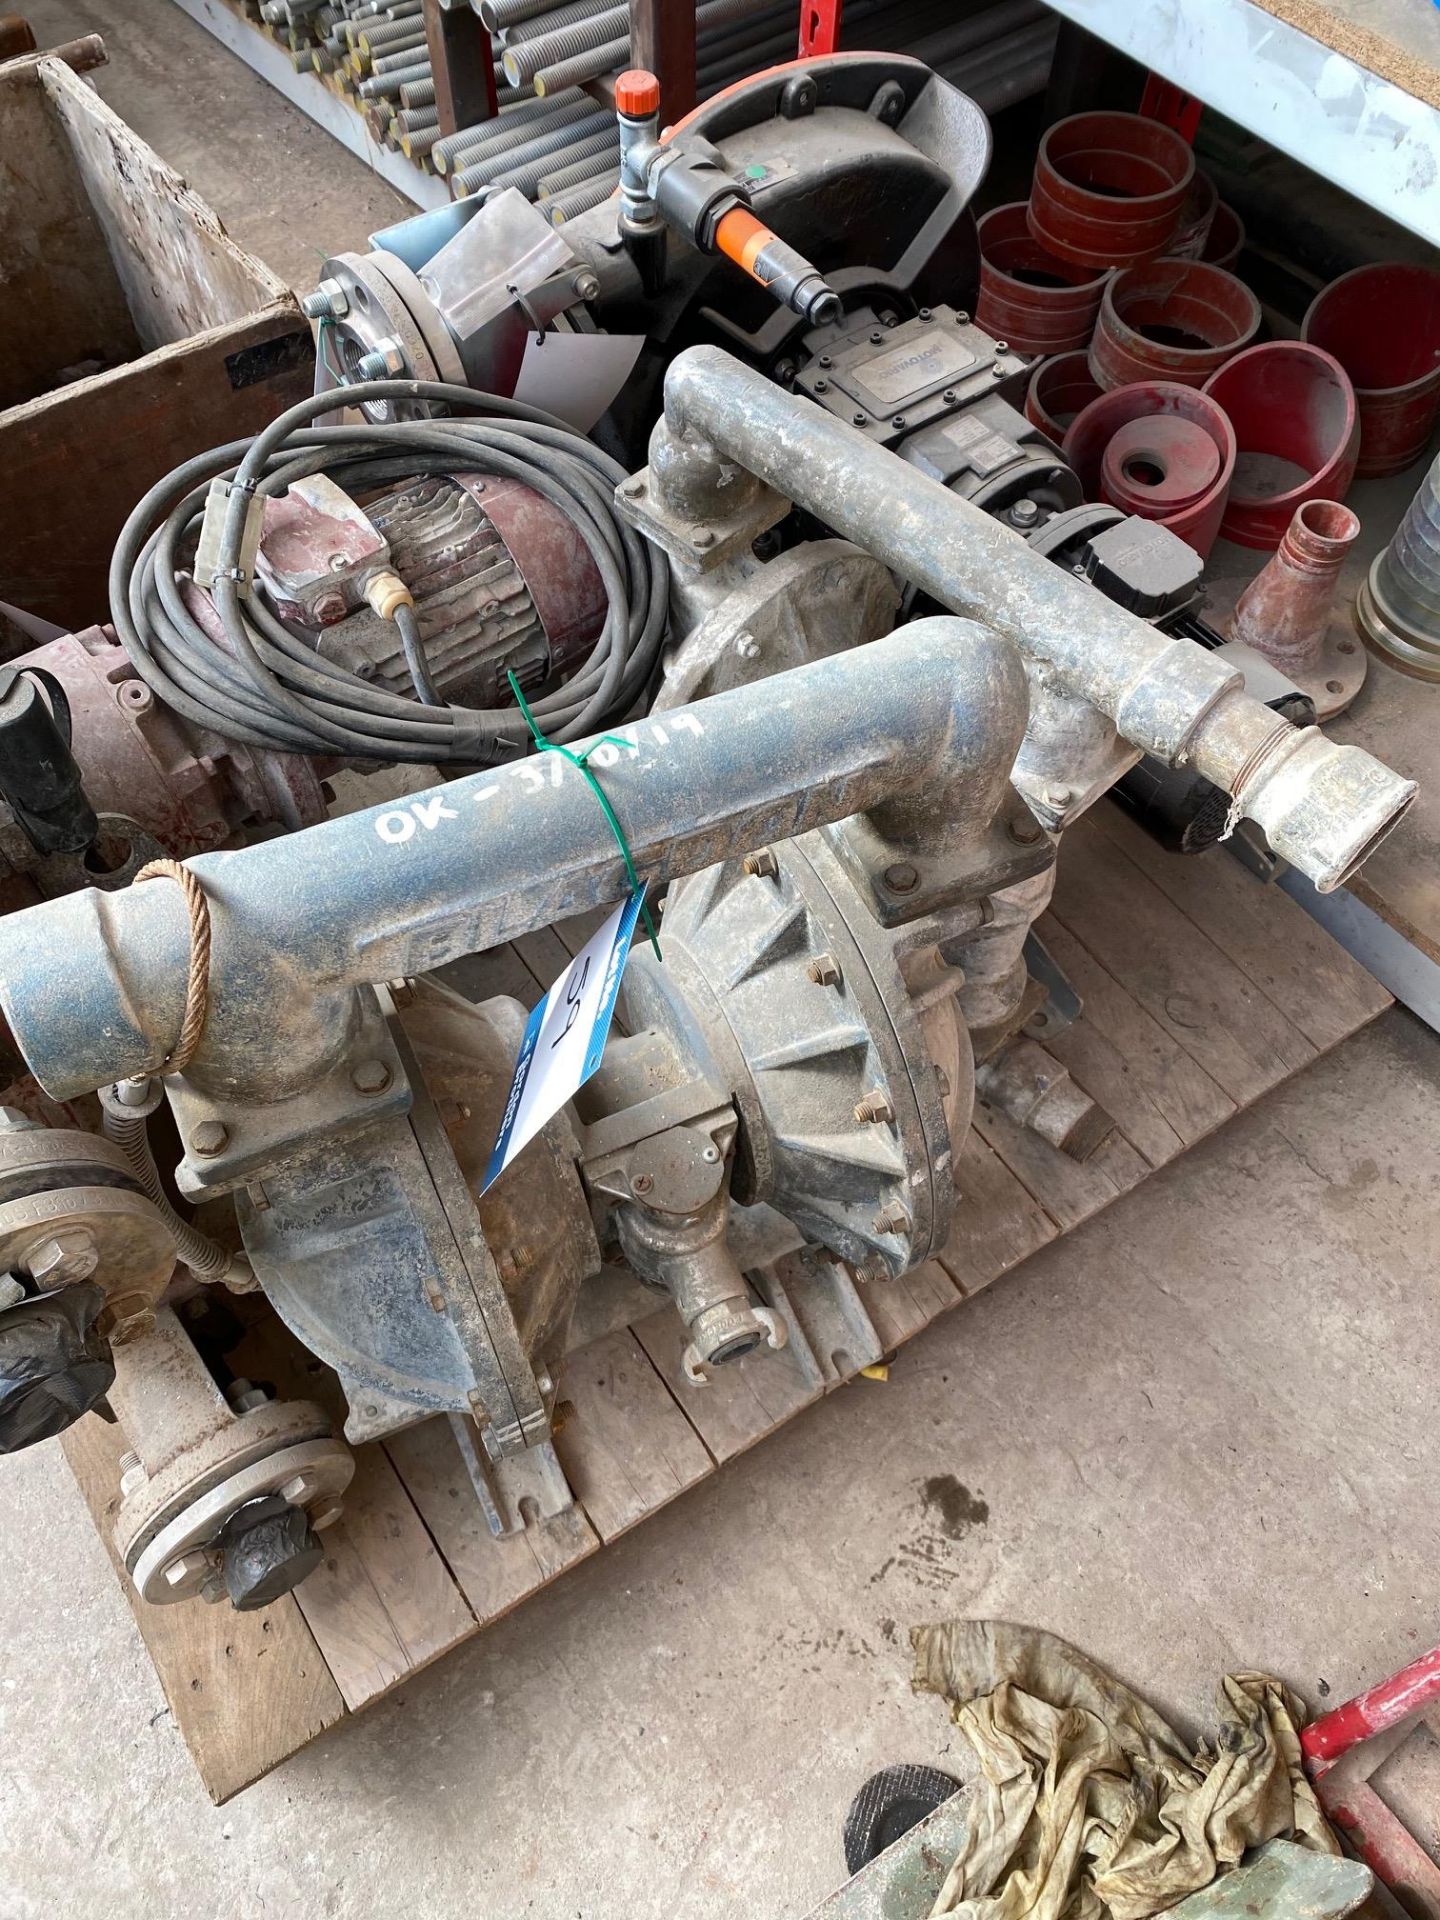 2x Unbranded pneumatic diaphragm pumps - Lot Available For Collection Now. - Lot Available For